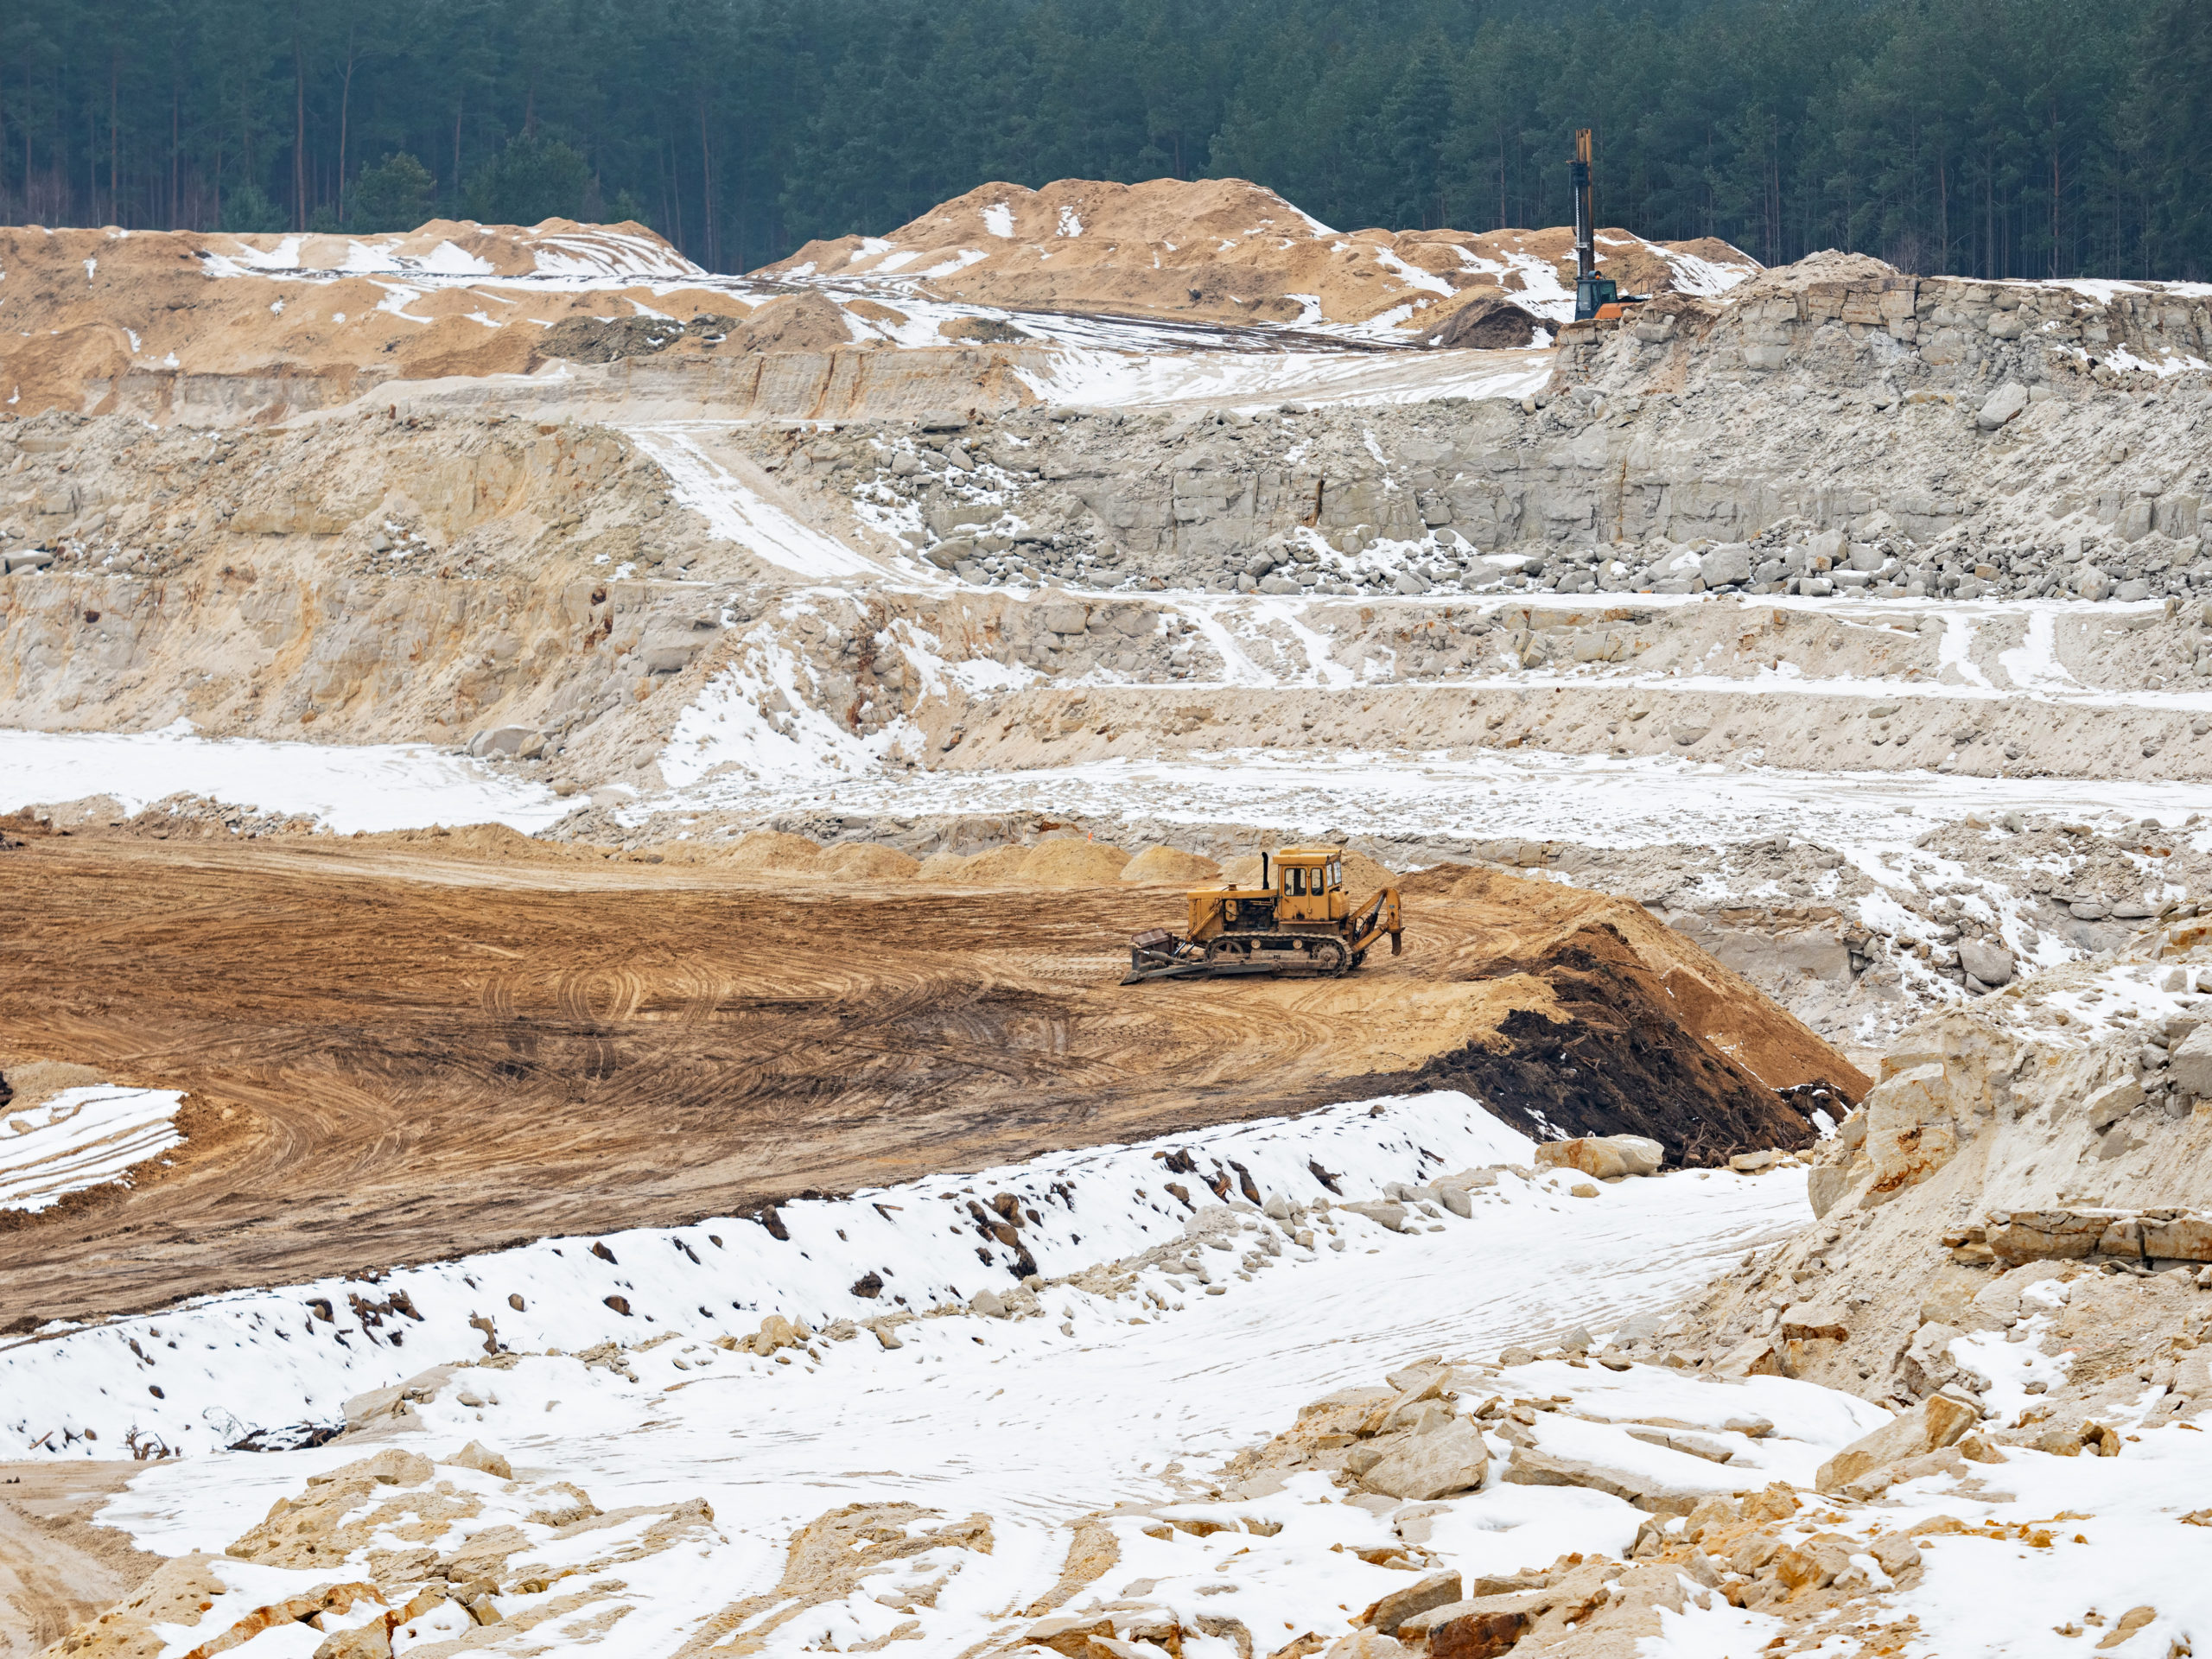 Excavators on a quarrying site working on silica glass sand. General open mine pit scene.